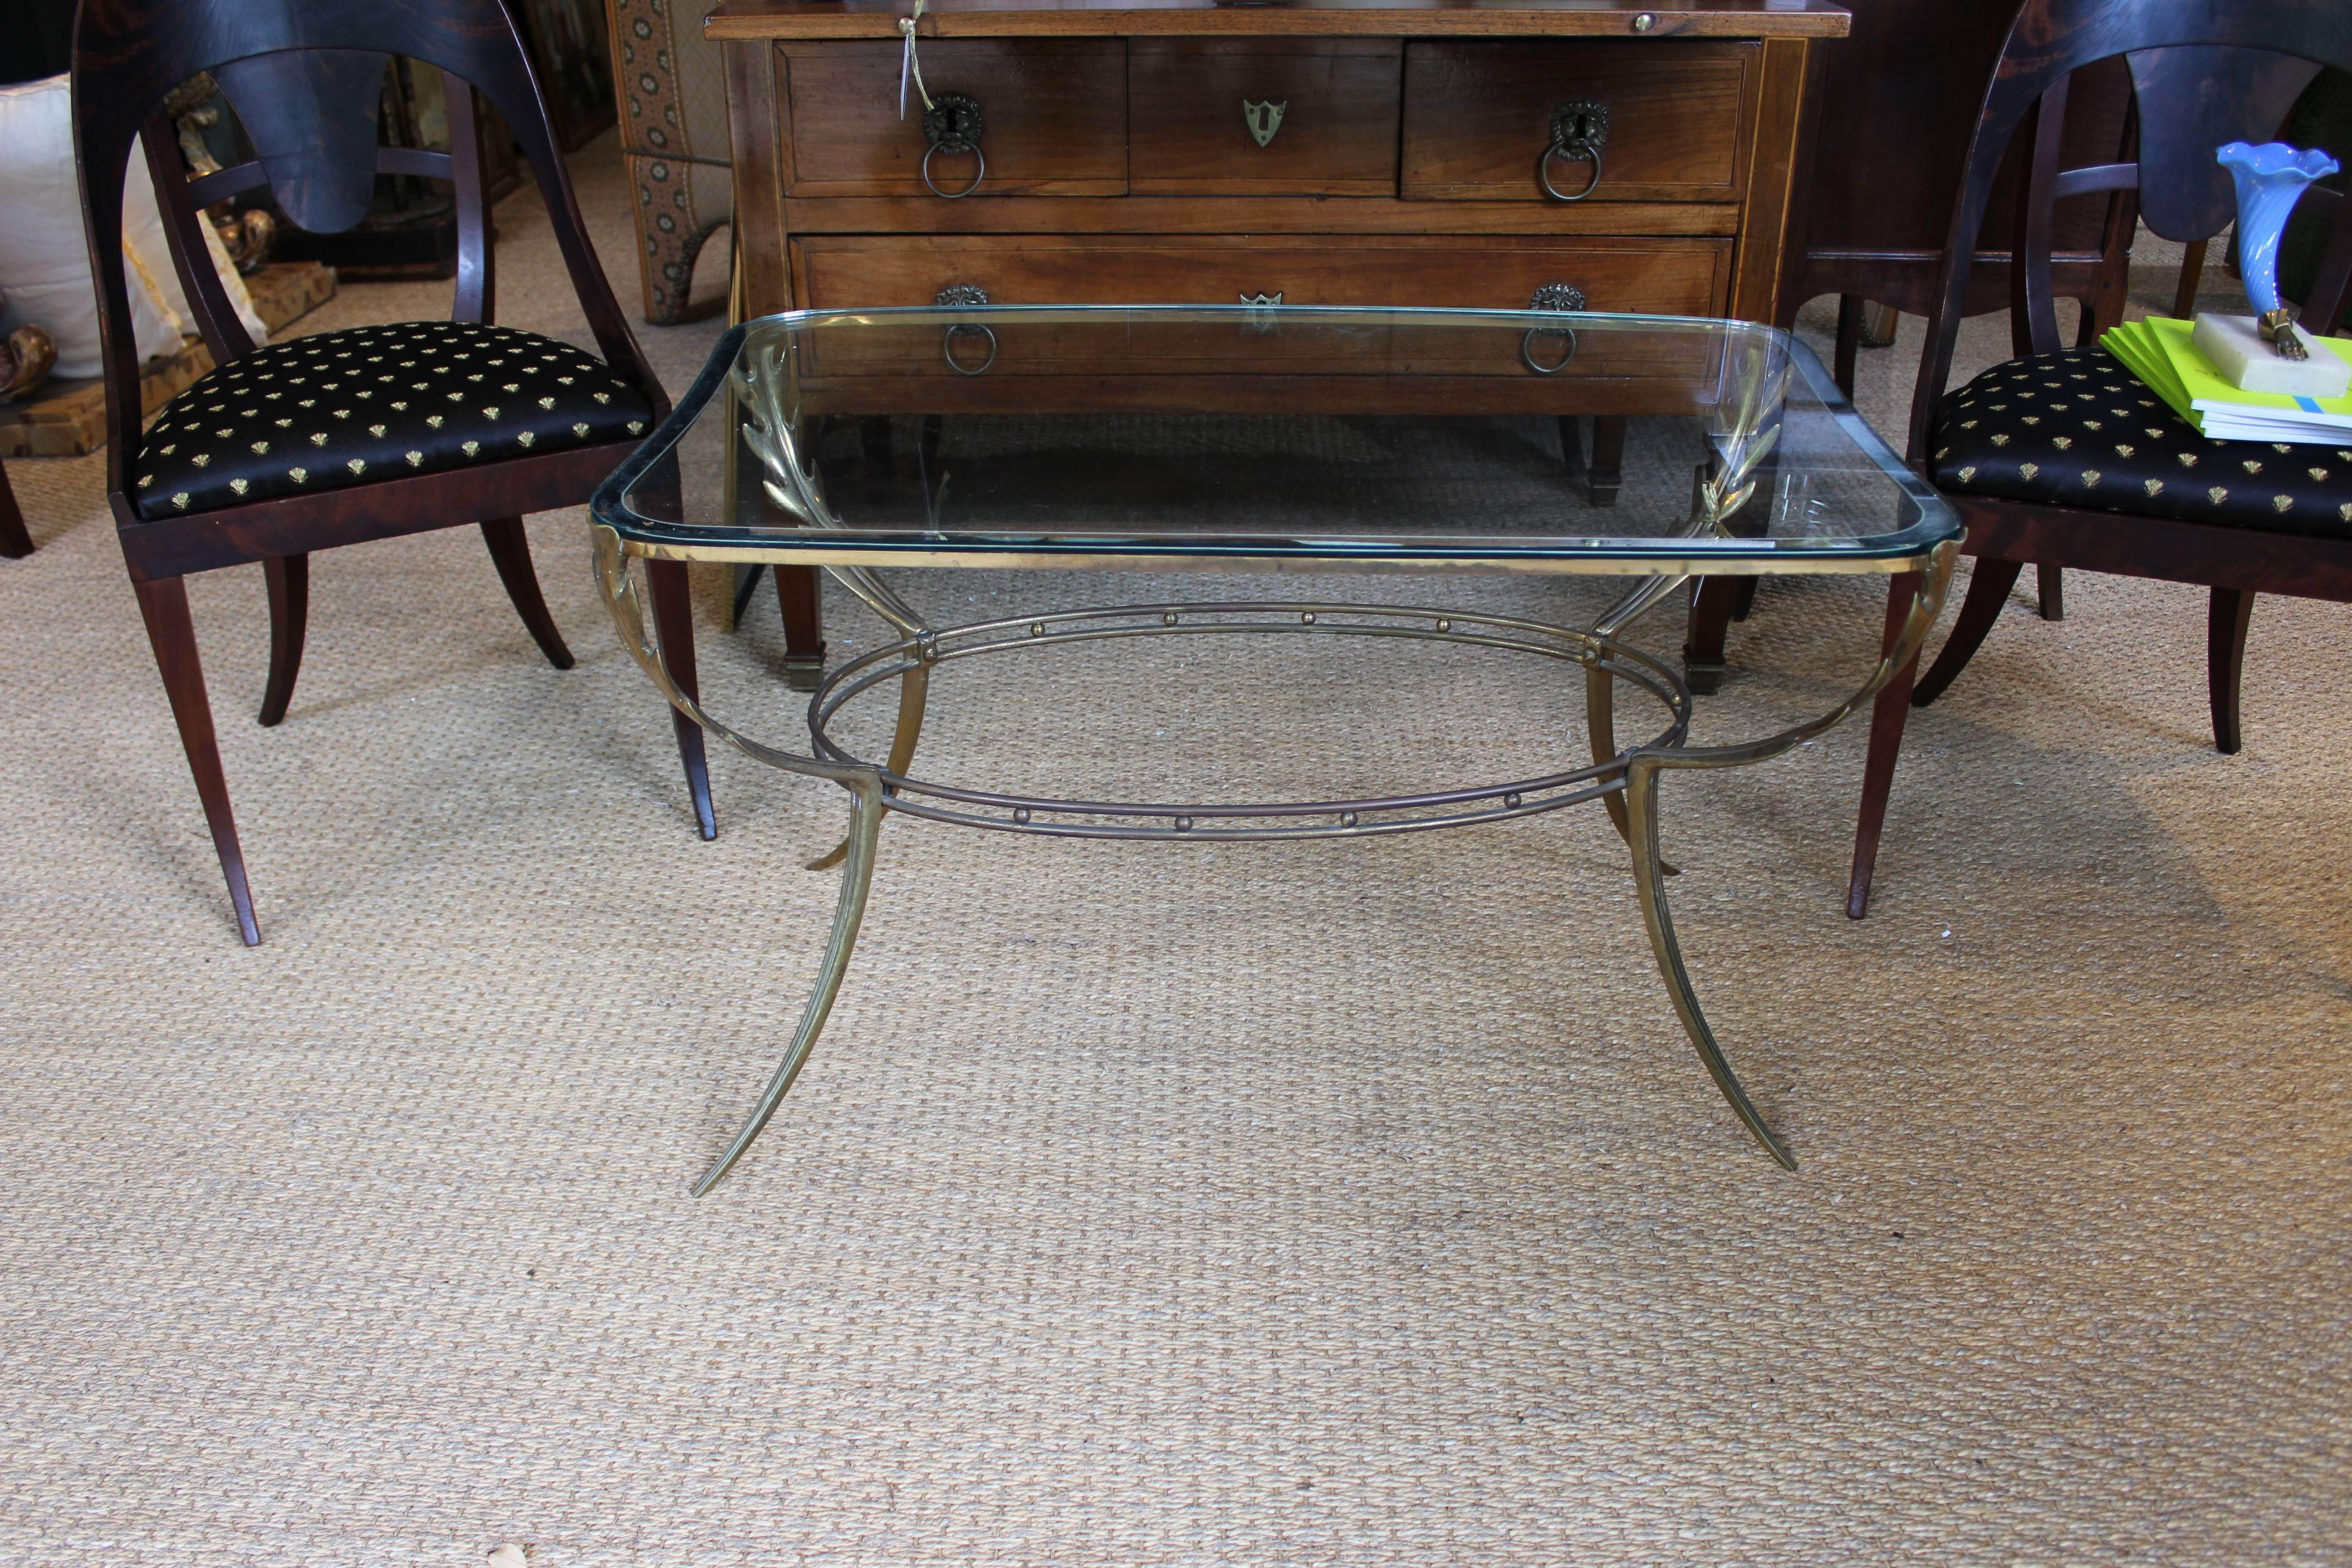 Italian brass coffee table with leaf detail legs on fluted supports. Top is glass with curved frame.